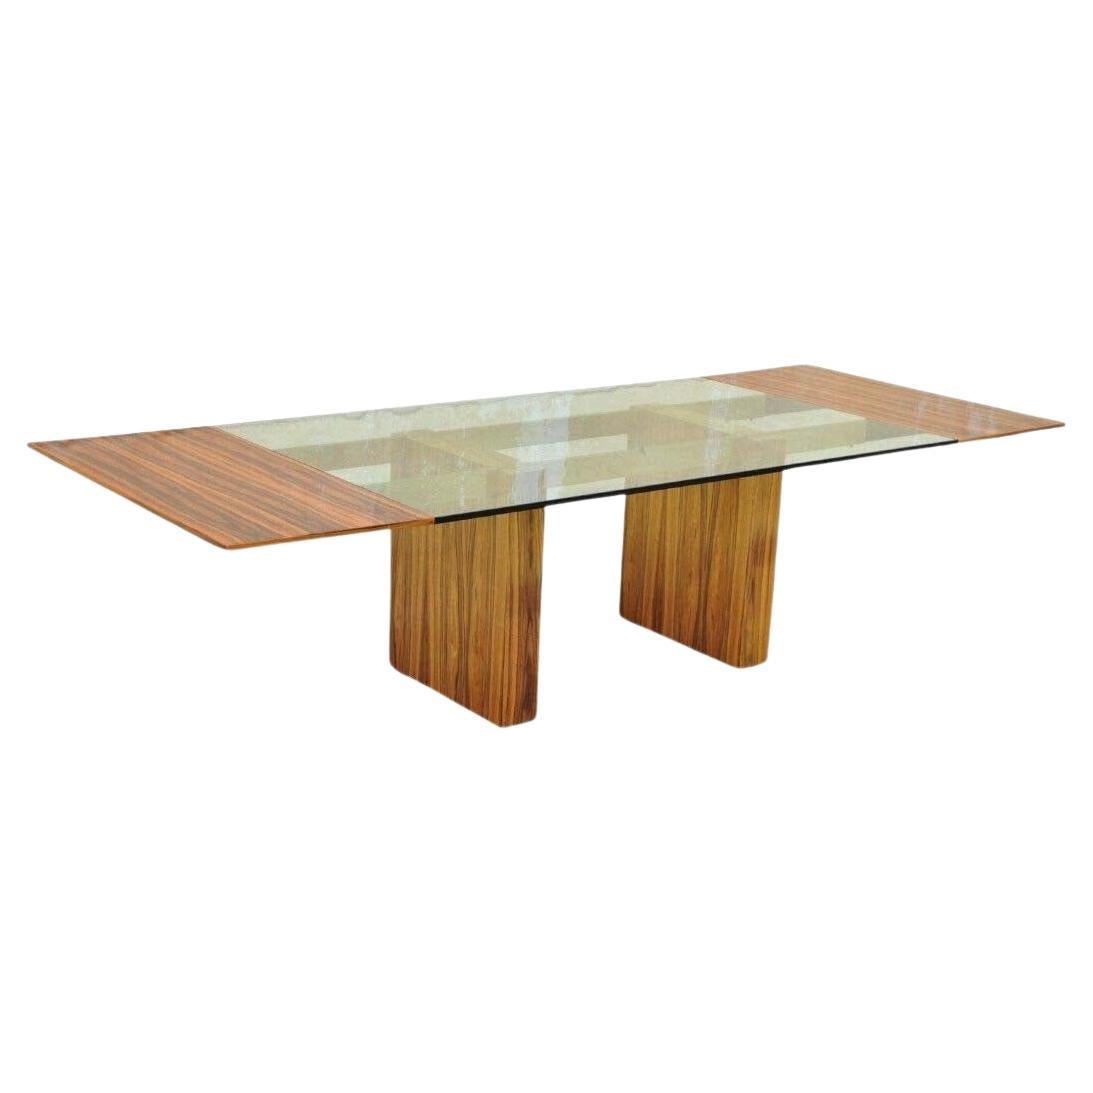 Kagan Lacquered Rosewood and Brass Cantilever Glass Top Extension Dining Table For Sale